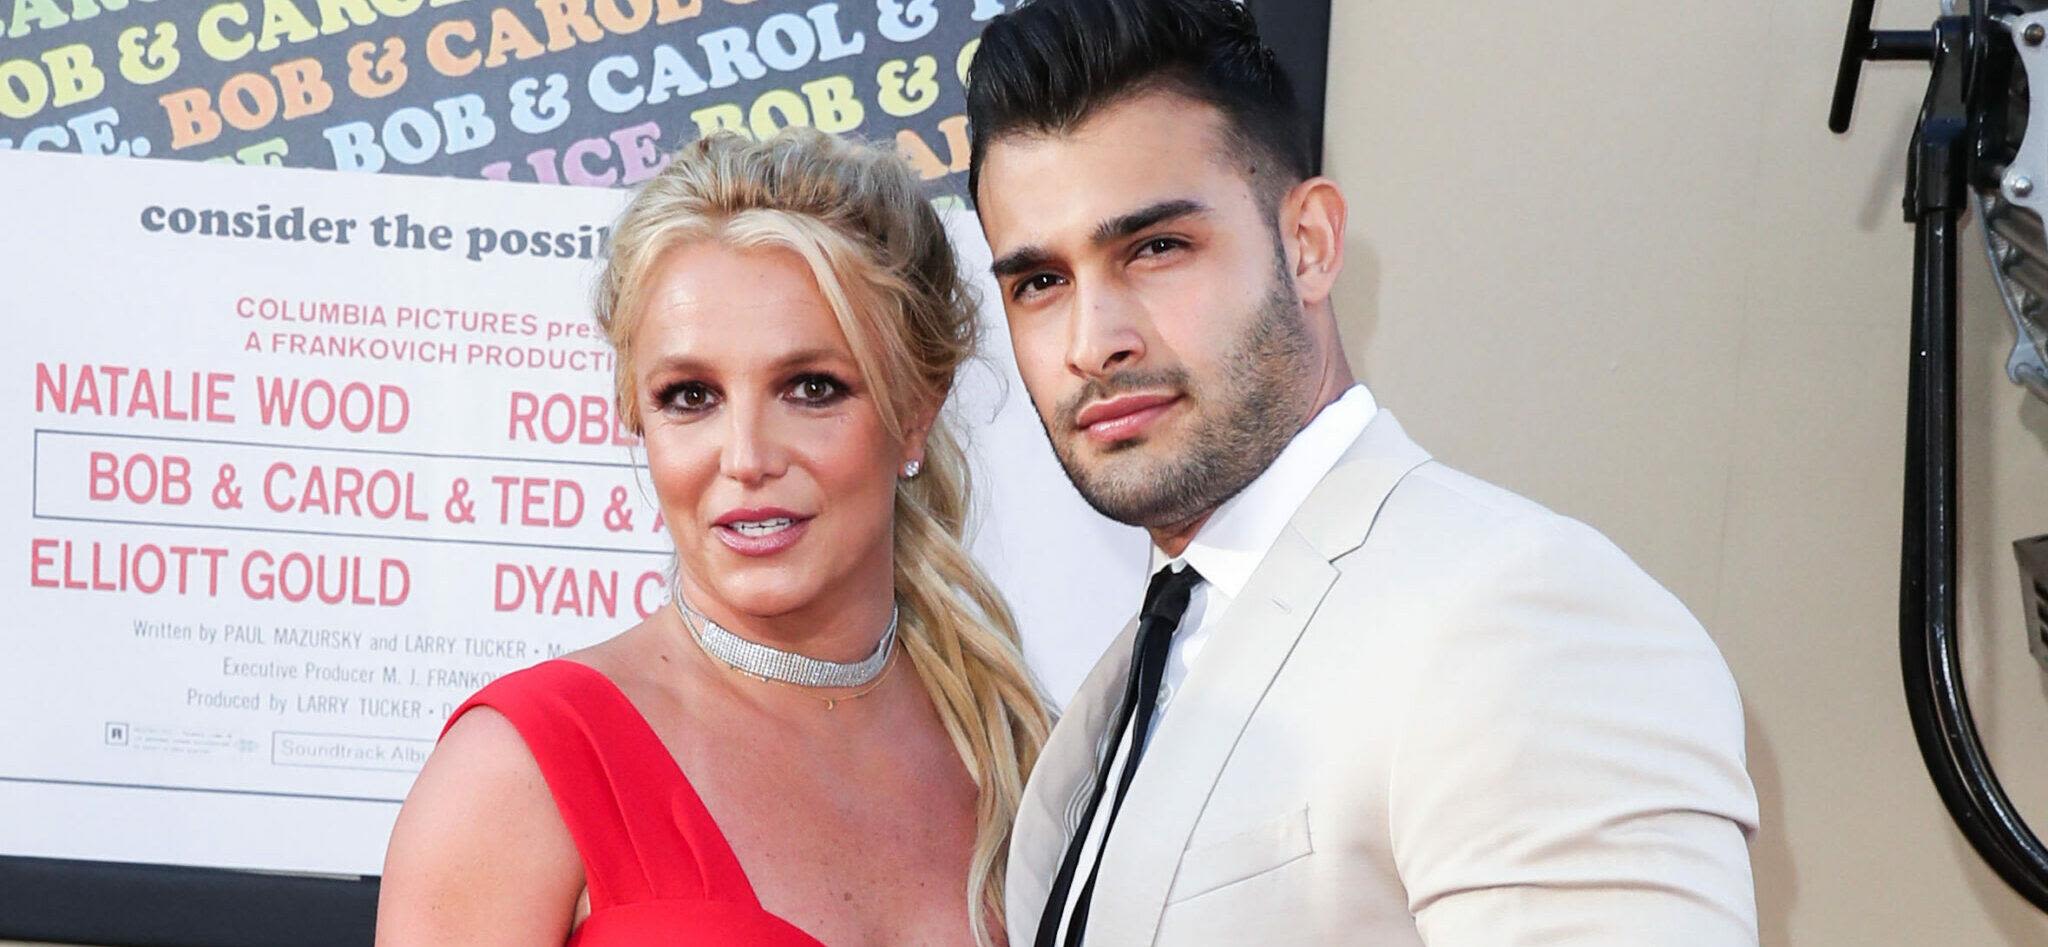 Britney Spears Shares New Look At Swollen Foot While Sam Asghari 'Feels Terrible'